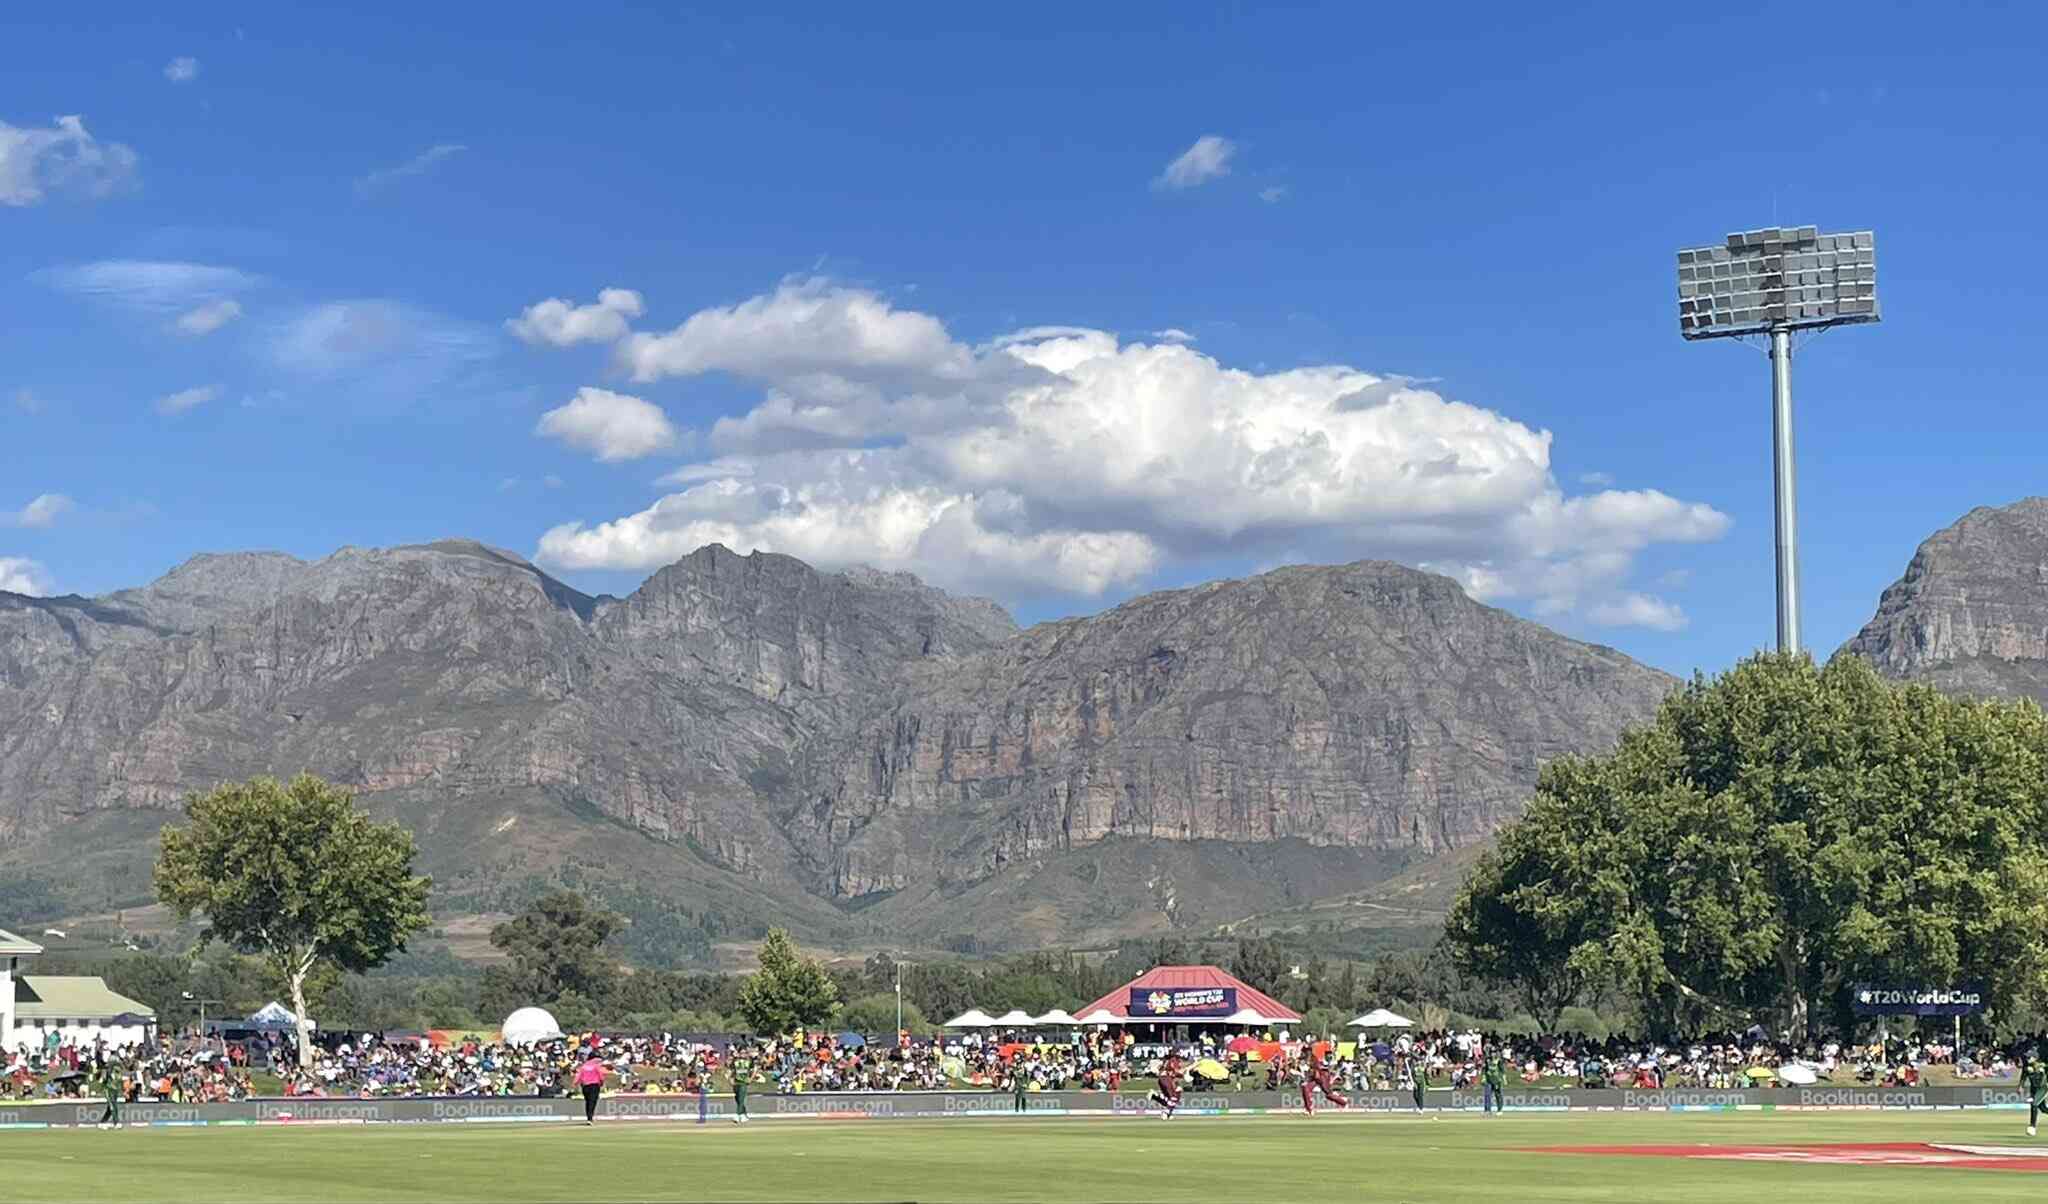 Boland Park Paarl Weather Report For SA vs IND 3rd ODI